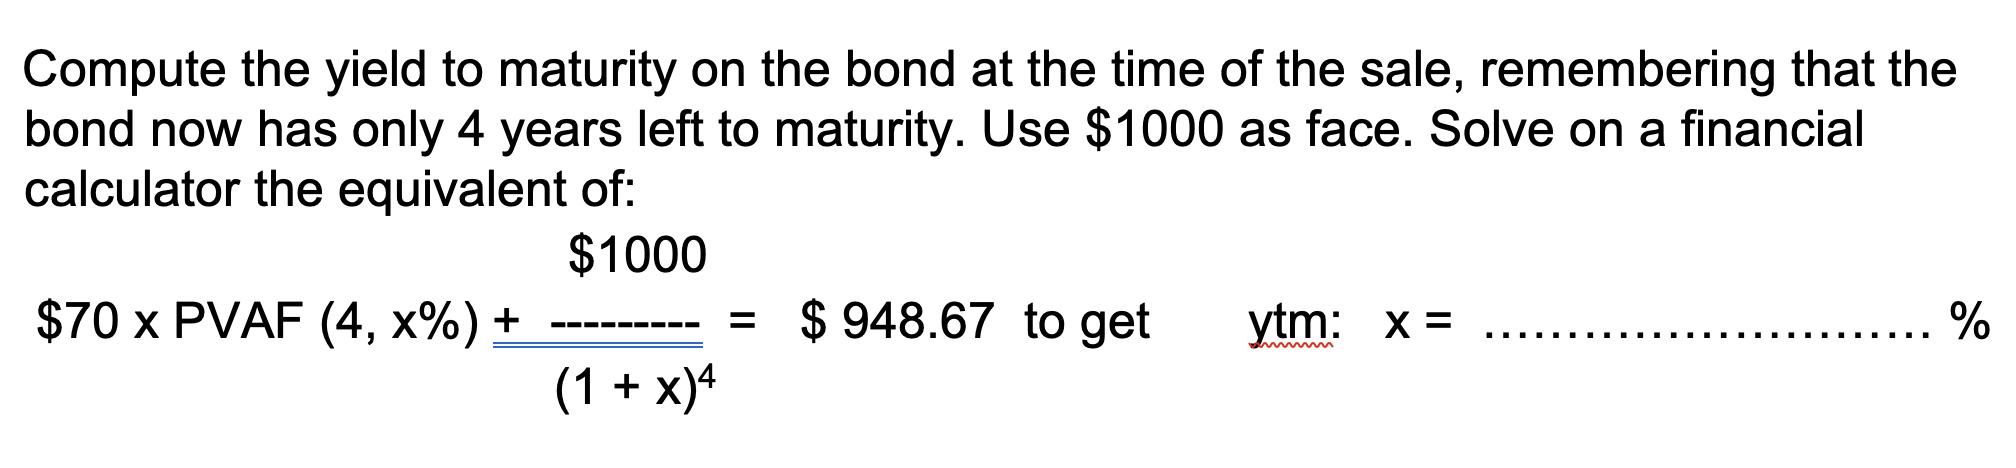 Compute the yield to maturity on the bond at the time of the sale, remembering that the bond now has only 4 years left to mat